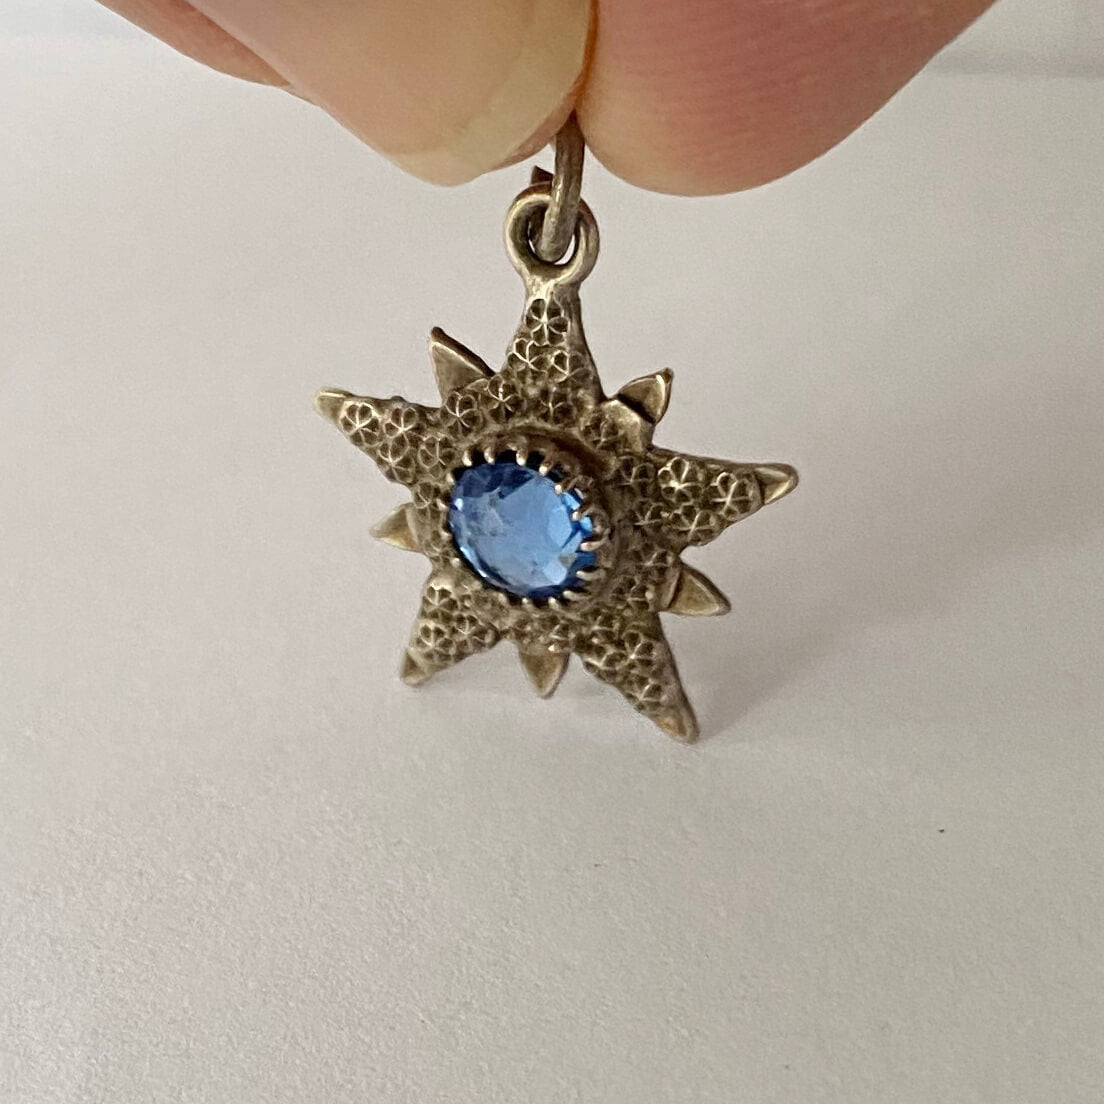 English silver antique star pendant with blue centre stone made in 1904 by Charles Horner